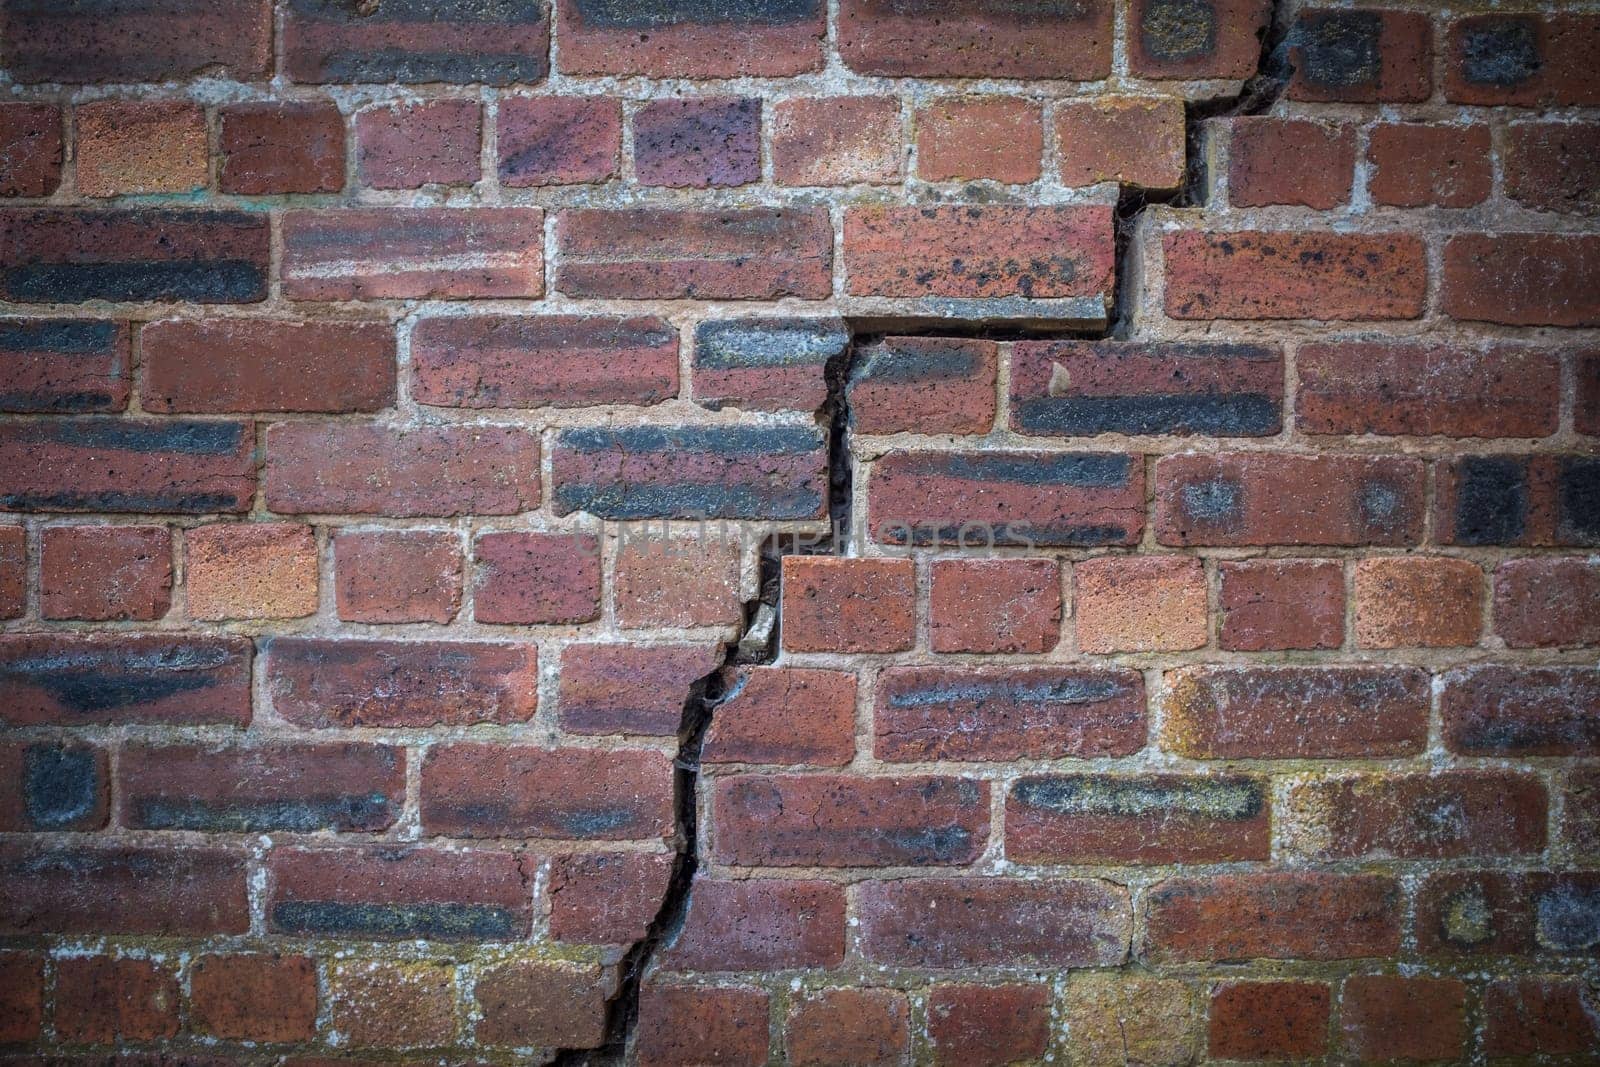 A Large Crack In An Old Red Brick Wall